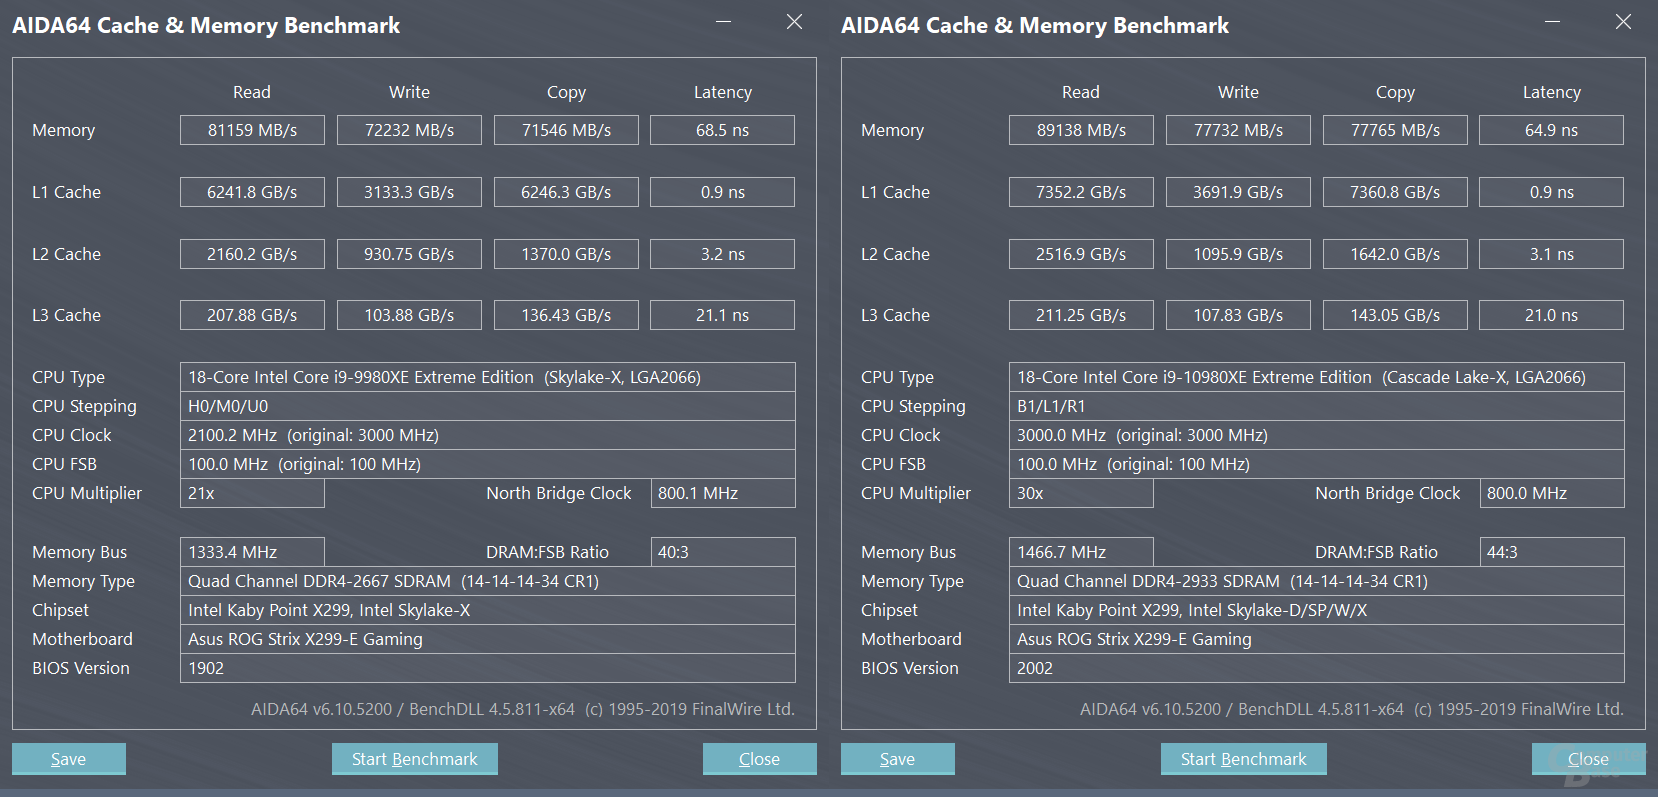 Storage benchmark only shows differences due to faster storage